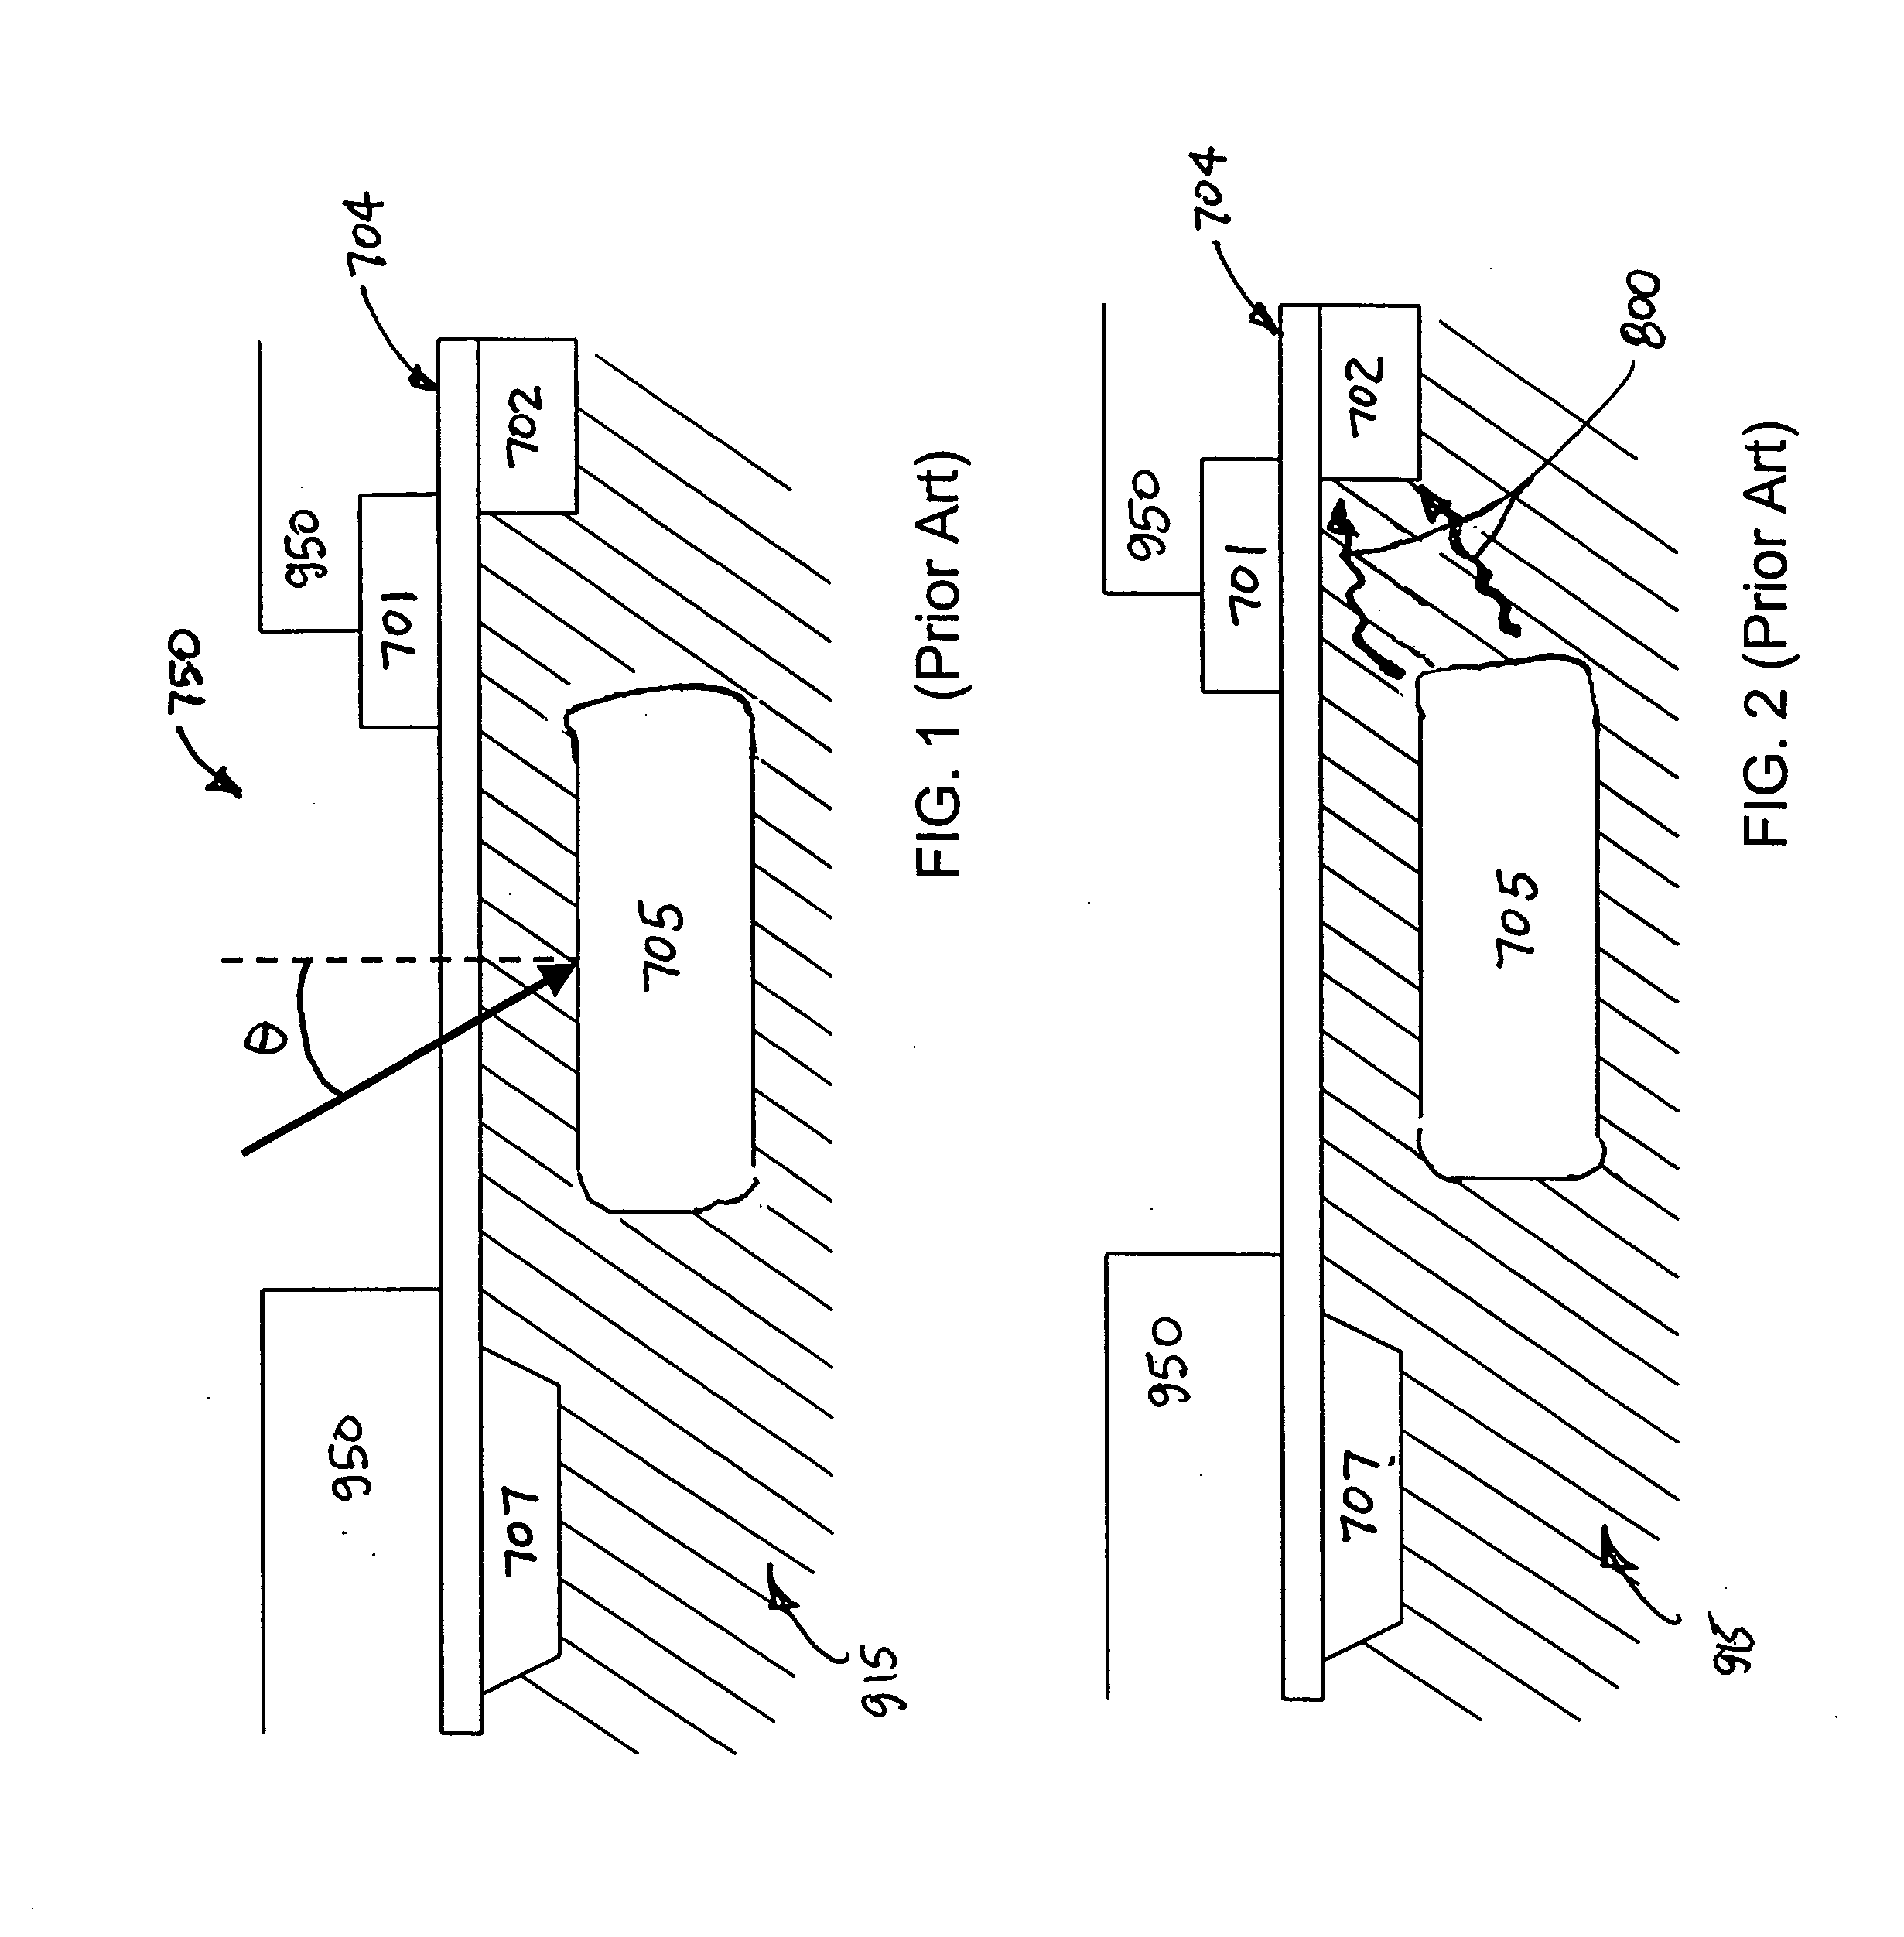 Optimized photodiode process for improved transfer gate leakage